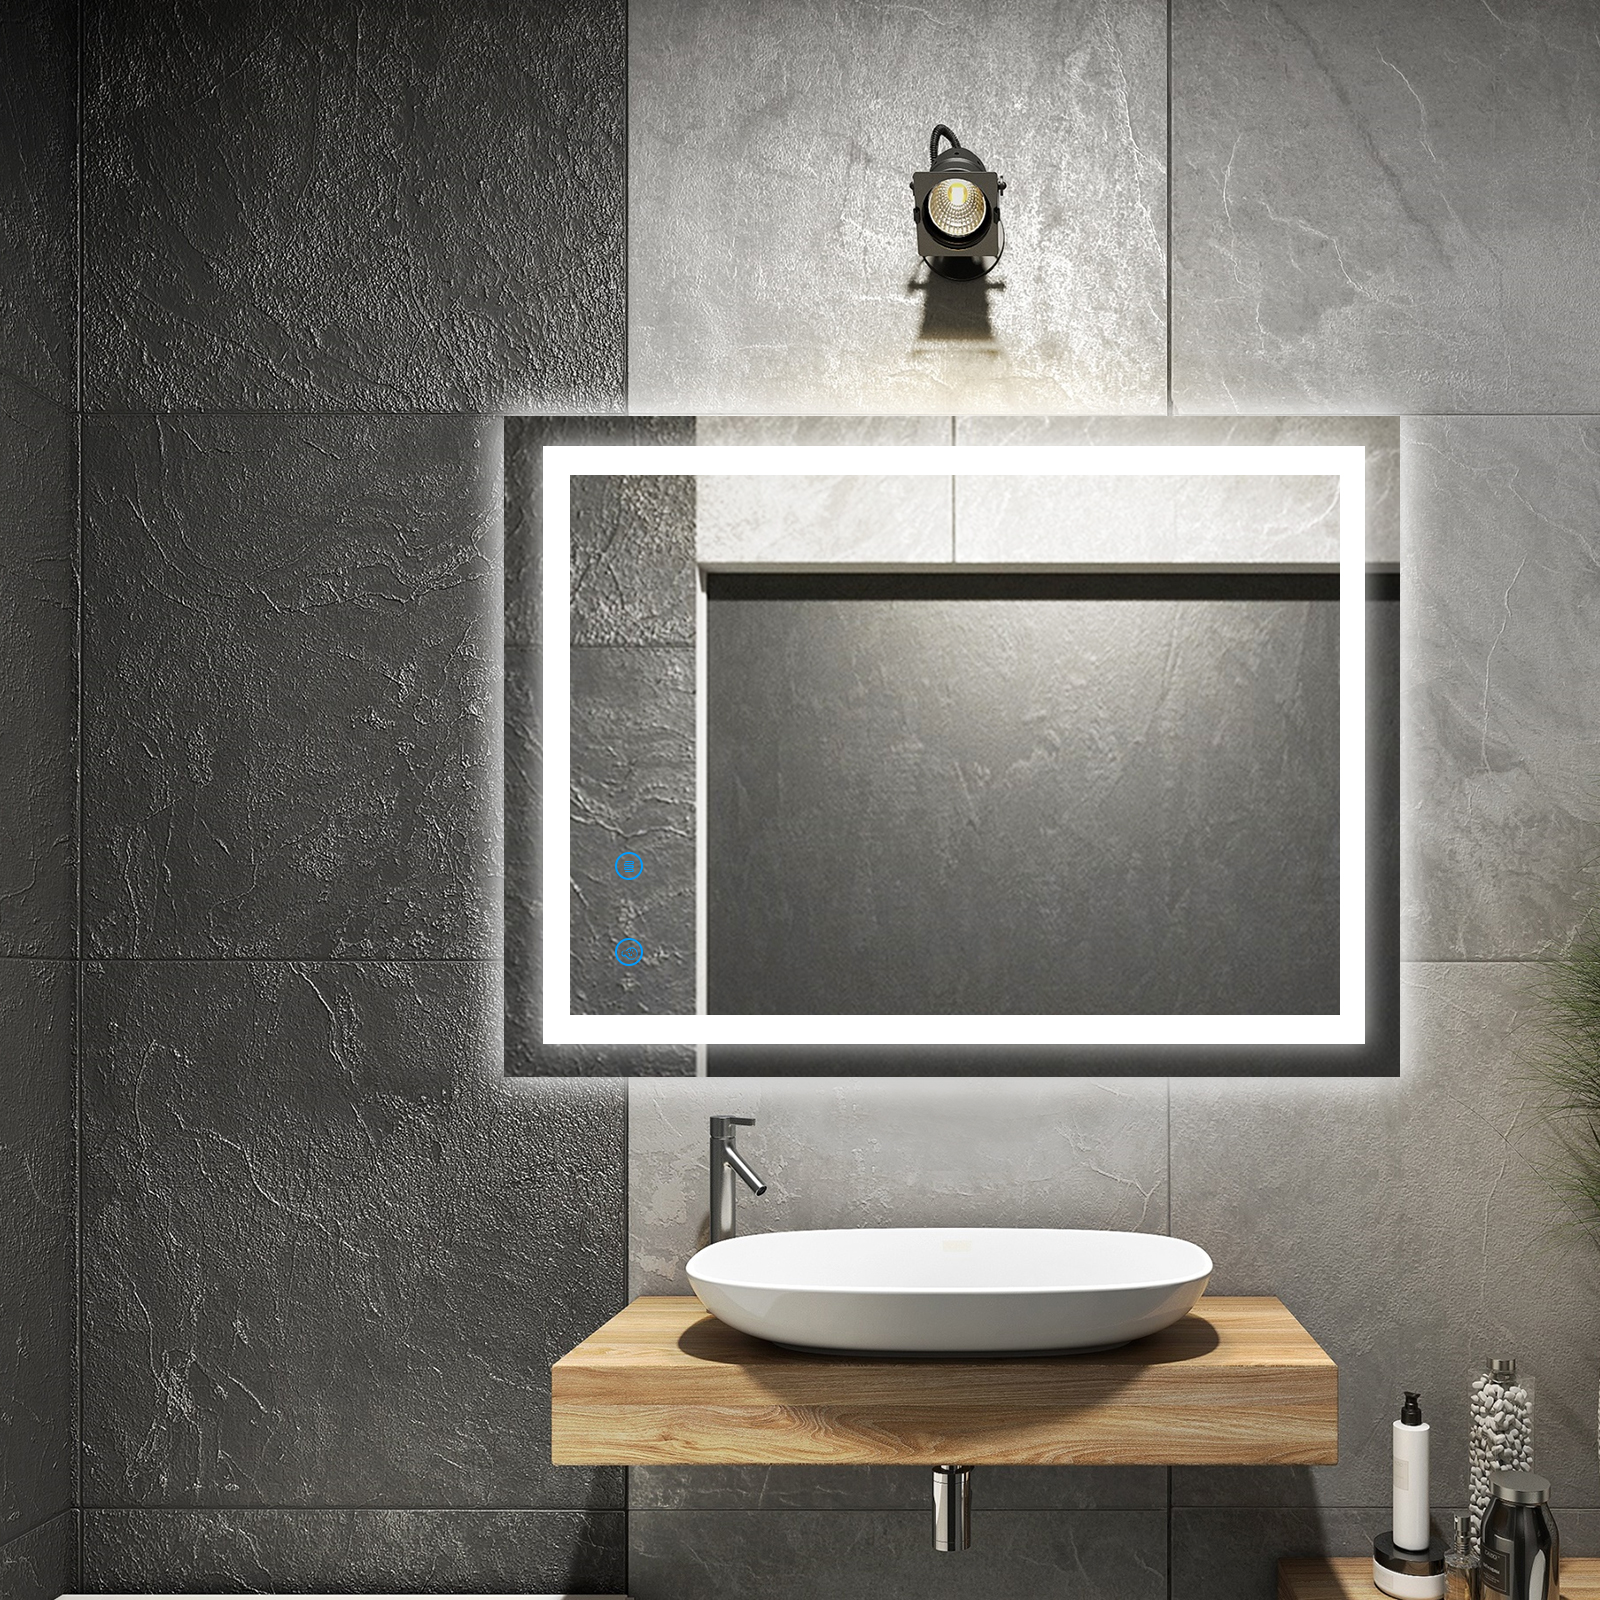 AVAWING LED Mirror Bathroom Vanity Wall Mounted, Dimmable Anti-Fog Smart  Mirror with Light, 28 x 36 Inch, CRI 95+, CCT Adjustable, UL Certification   IP 54 Waterproof (Vertical/Horizontal)